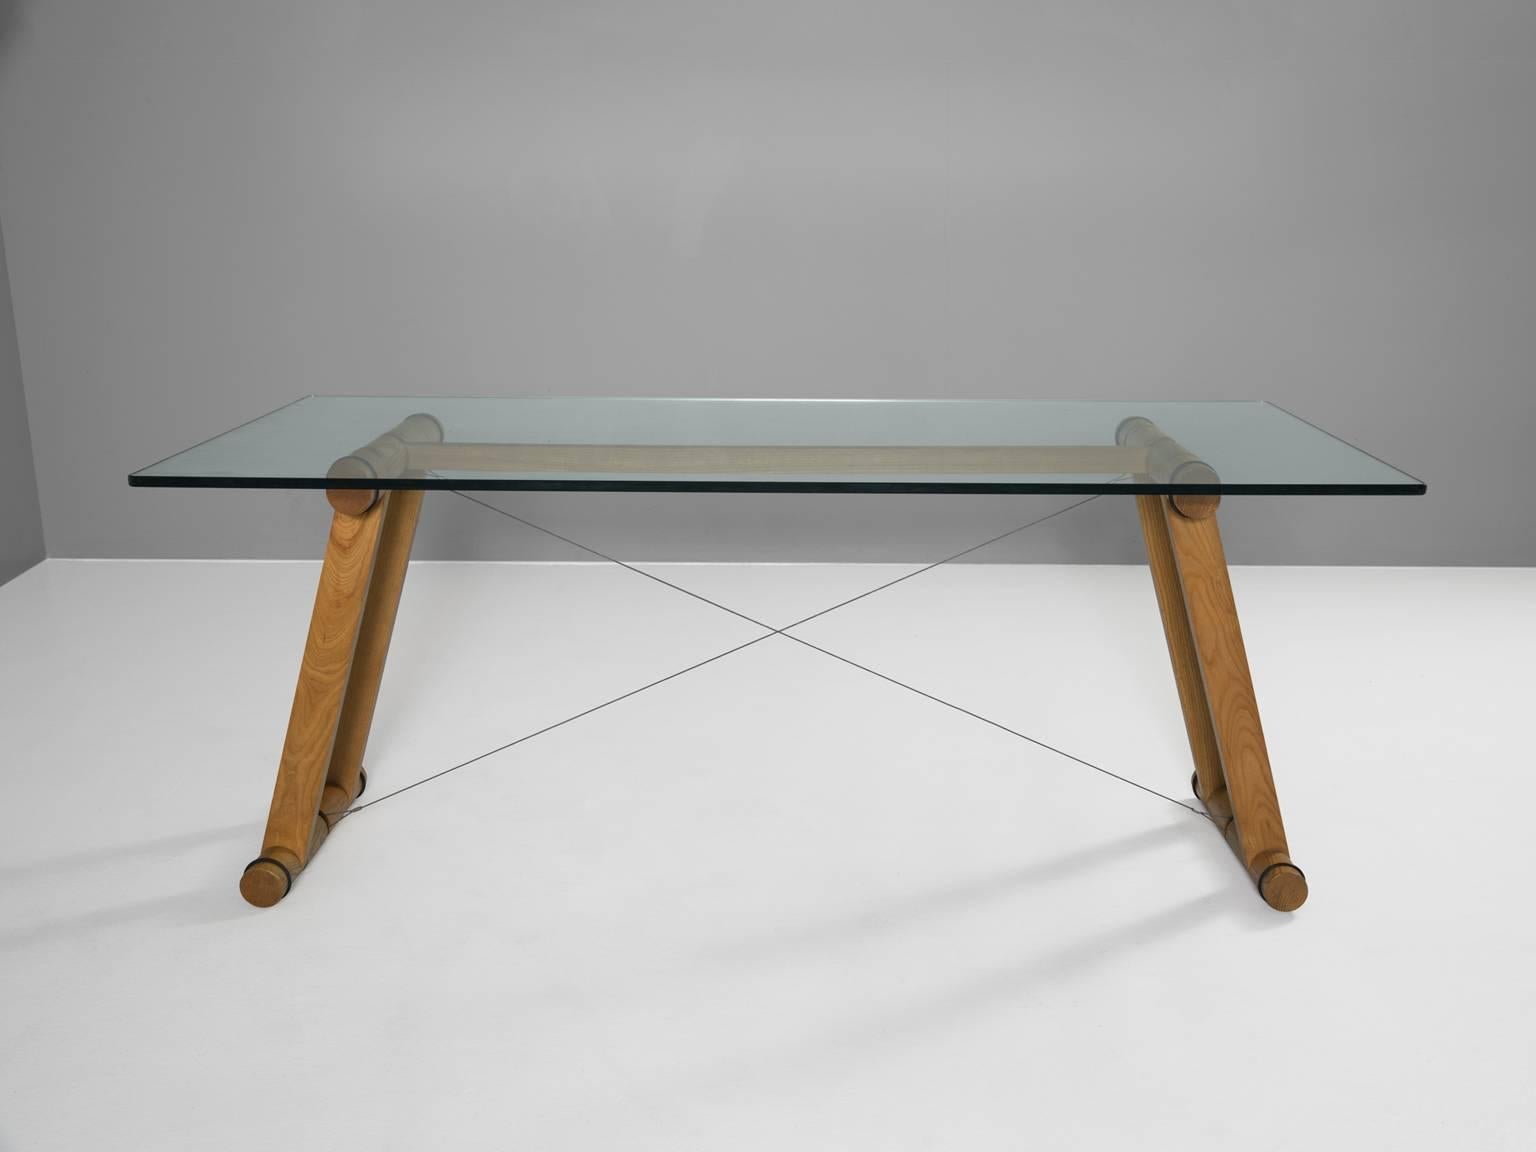 Table, in oak, metal and glass, by Superstudio, Italy, 1970s. 

Exceptional table by the Italian architects of Superstudio. Rare example with wooden base. The rectangular table has a clear glass top. The frame consists of four large tubular legs